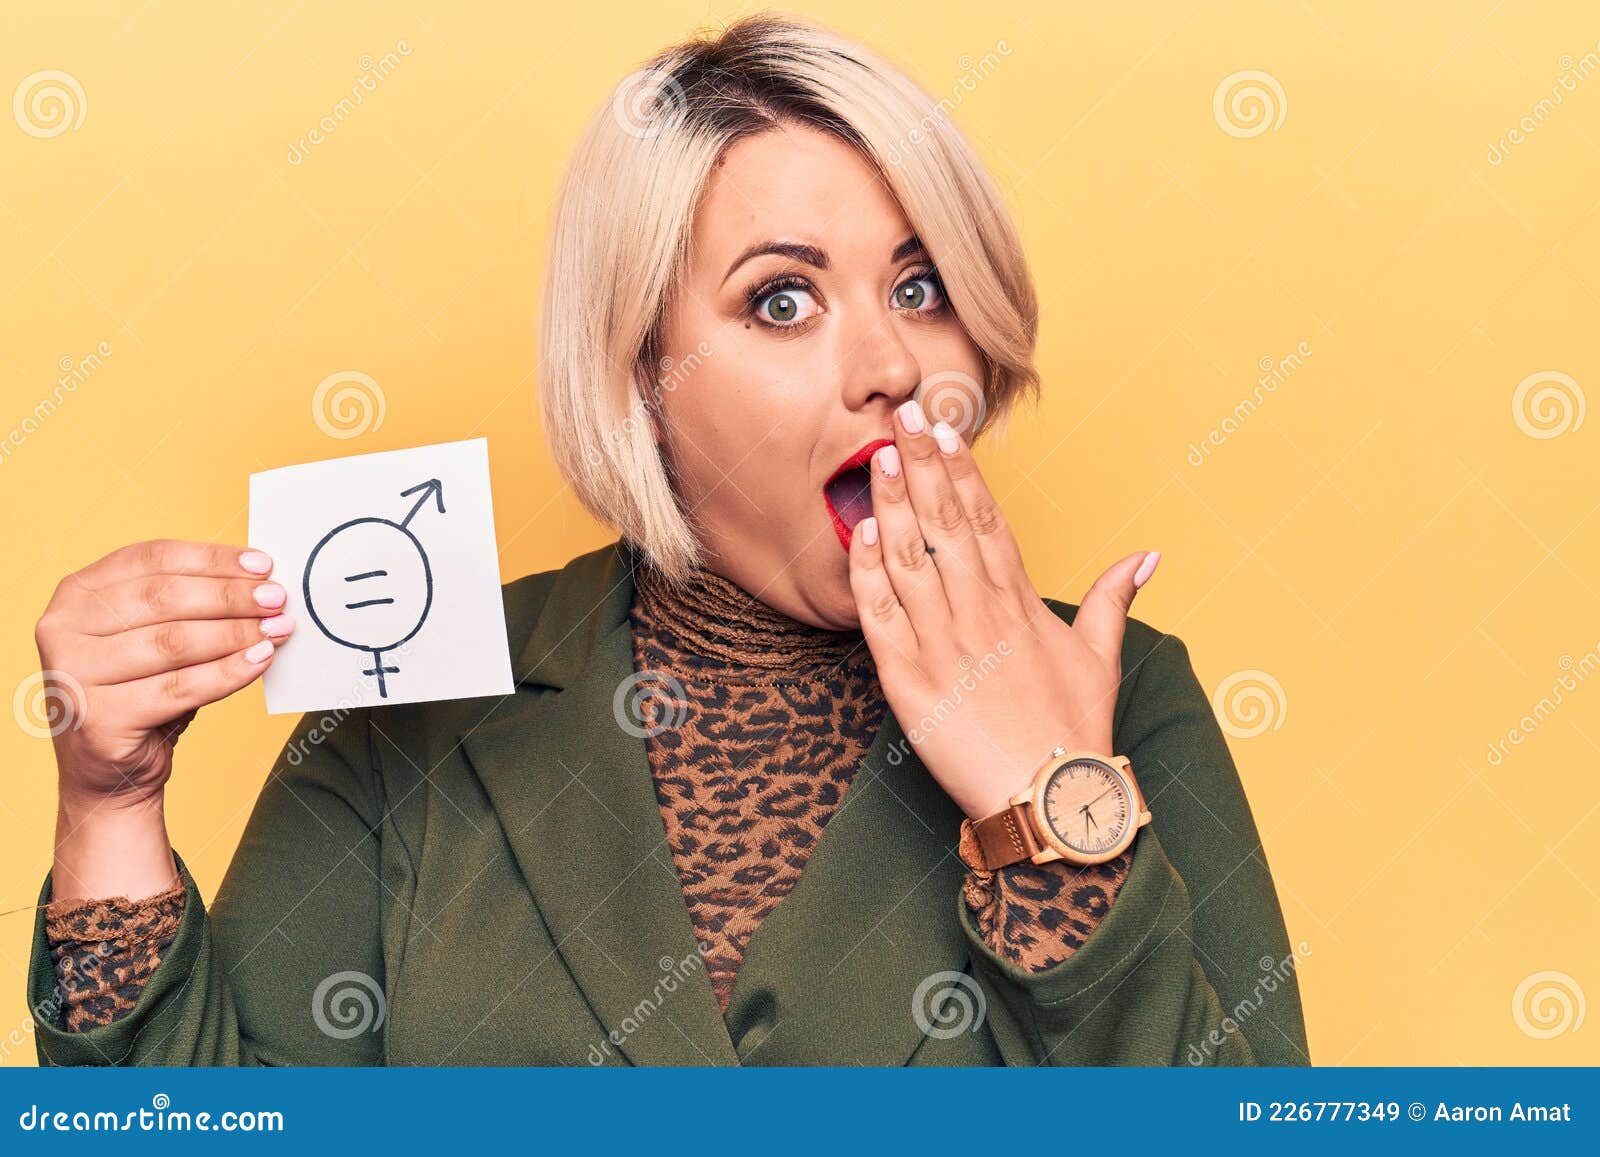 Blonde Plus Size Woman Asking for Sex Equality Holding Paper with Gender Equal Message Covering Mouth with Hand, Shocked and Stock Image